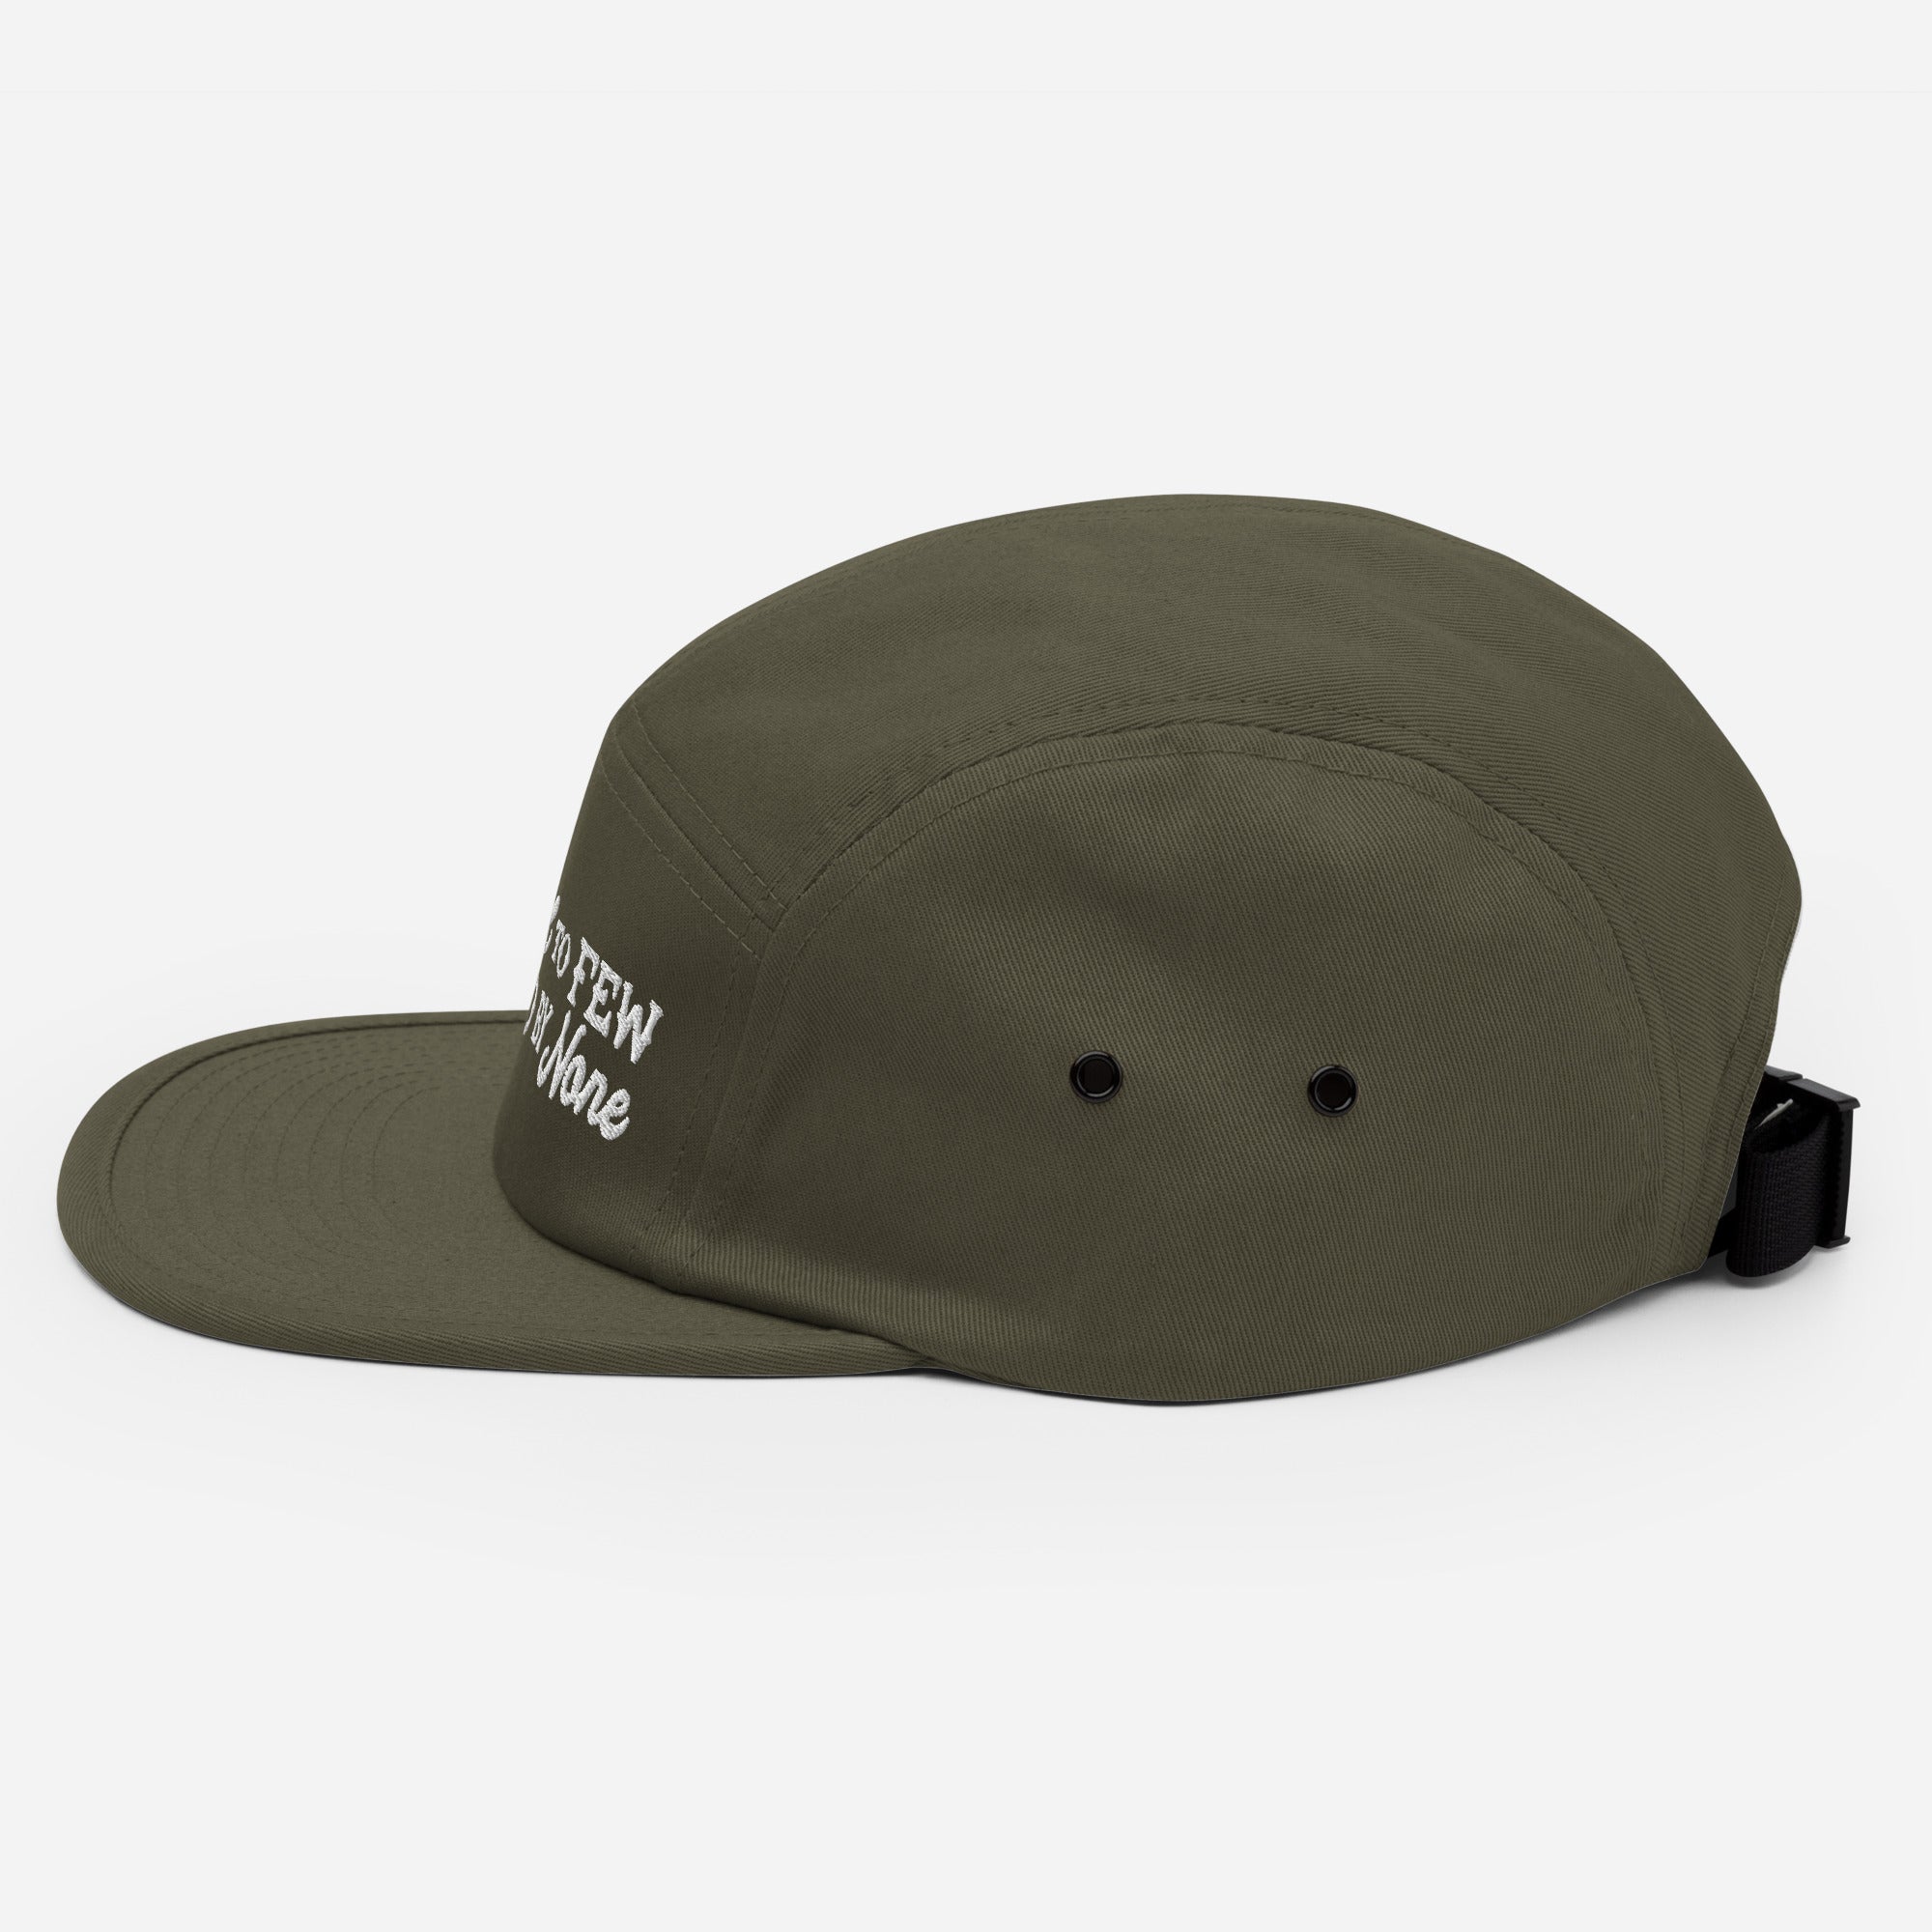 Loyal to Few Ruled By None Five Panel Camper Cap